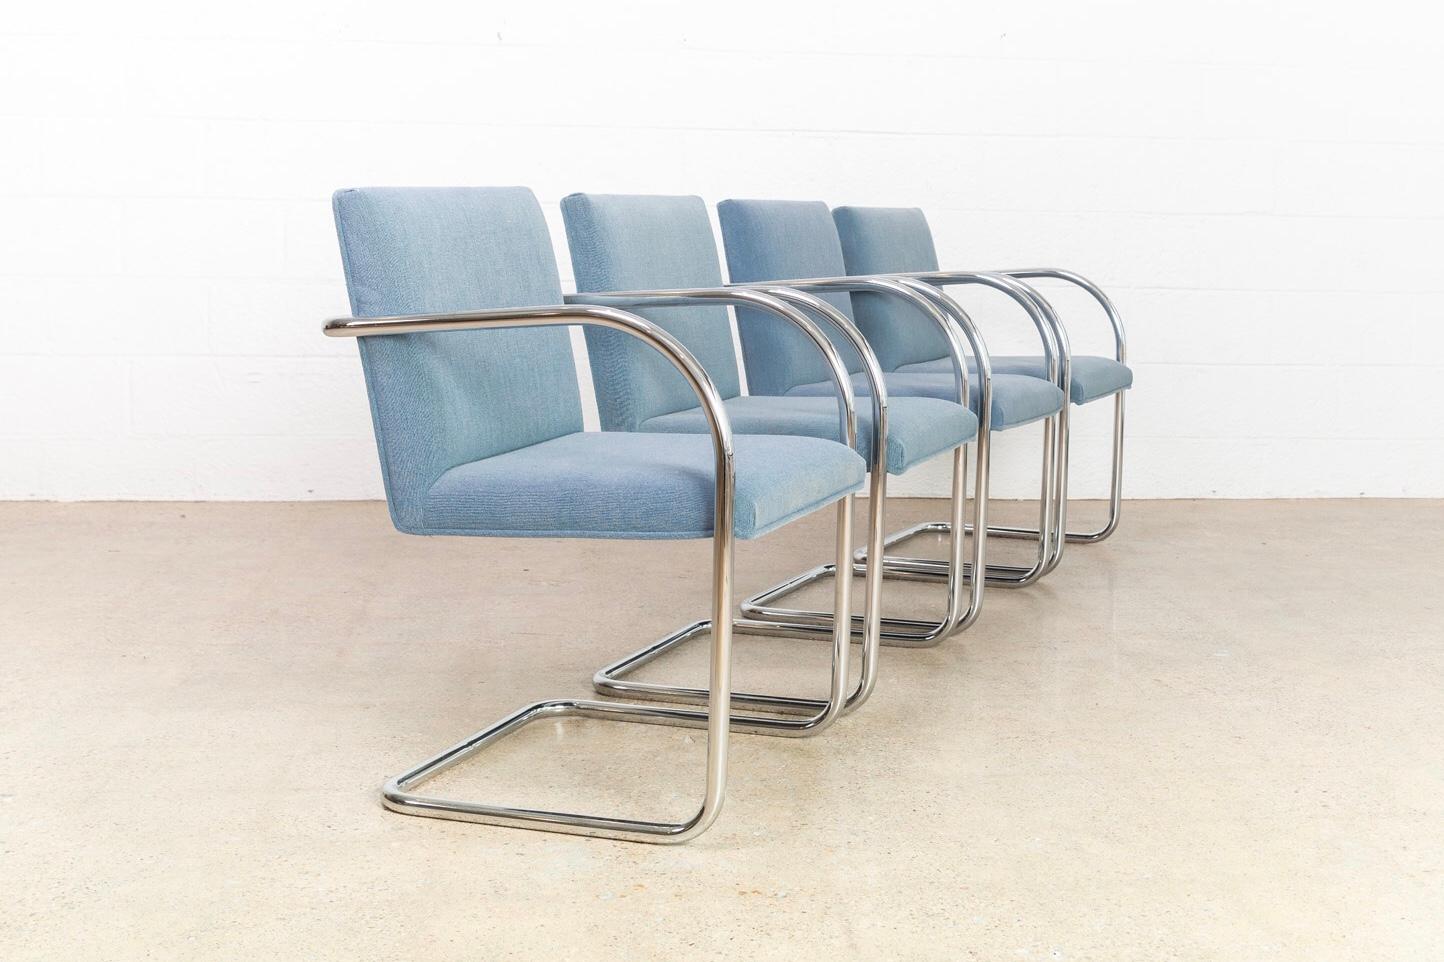 American Mies van der Rohe Blue BRNO Chrome Cantilever Dining Chairs, Set of 4